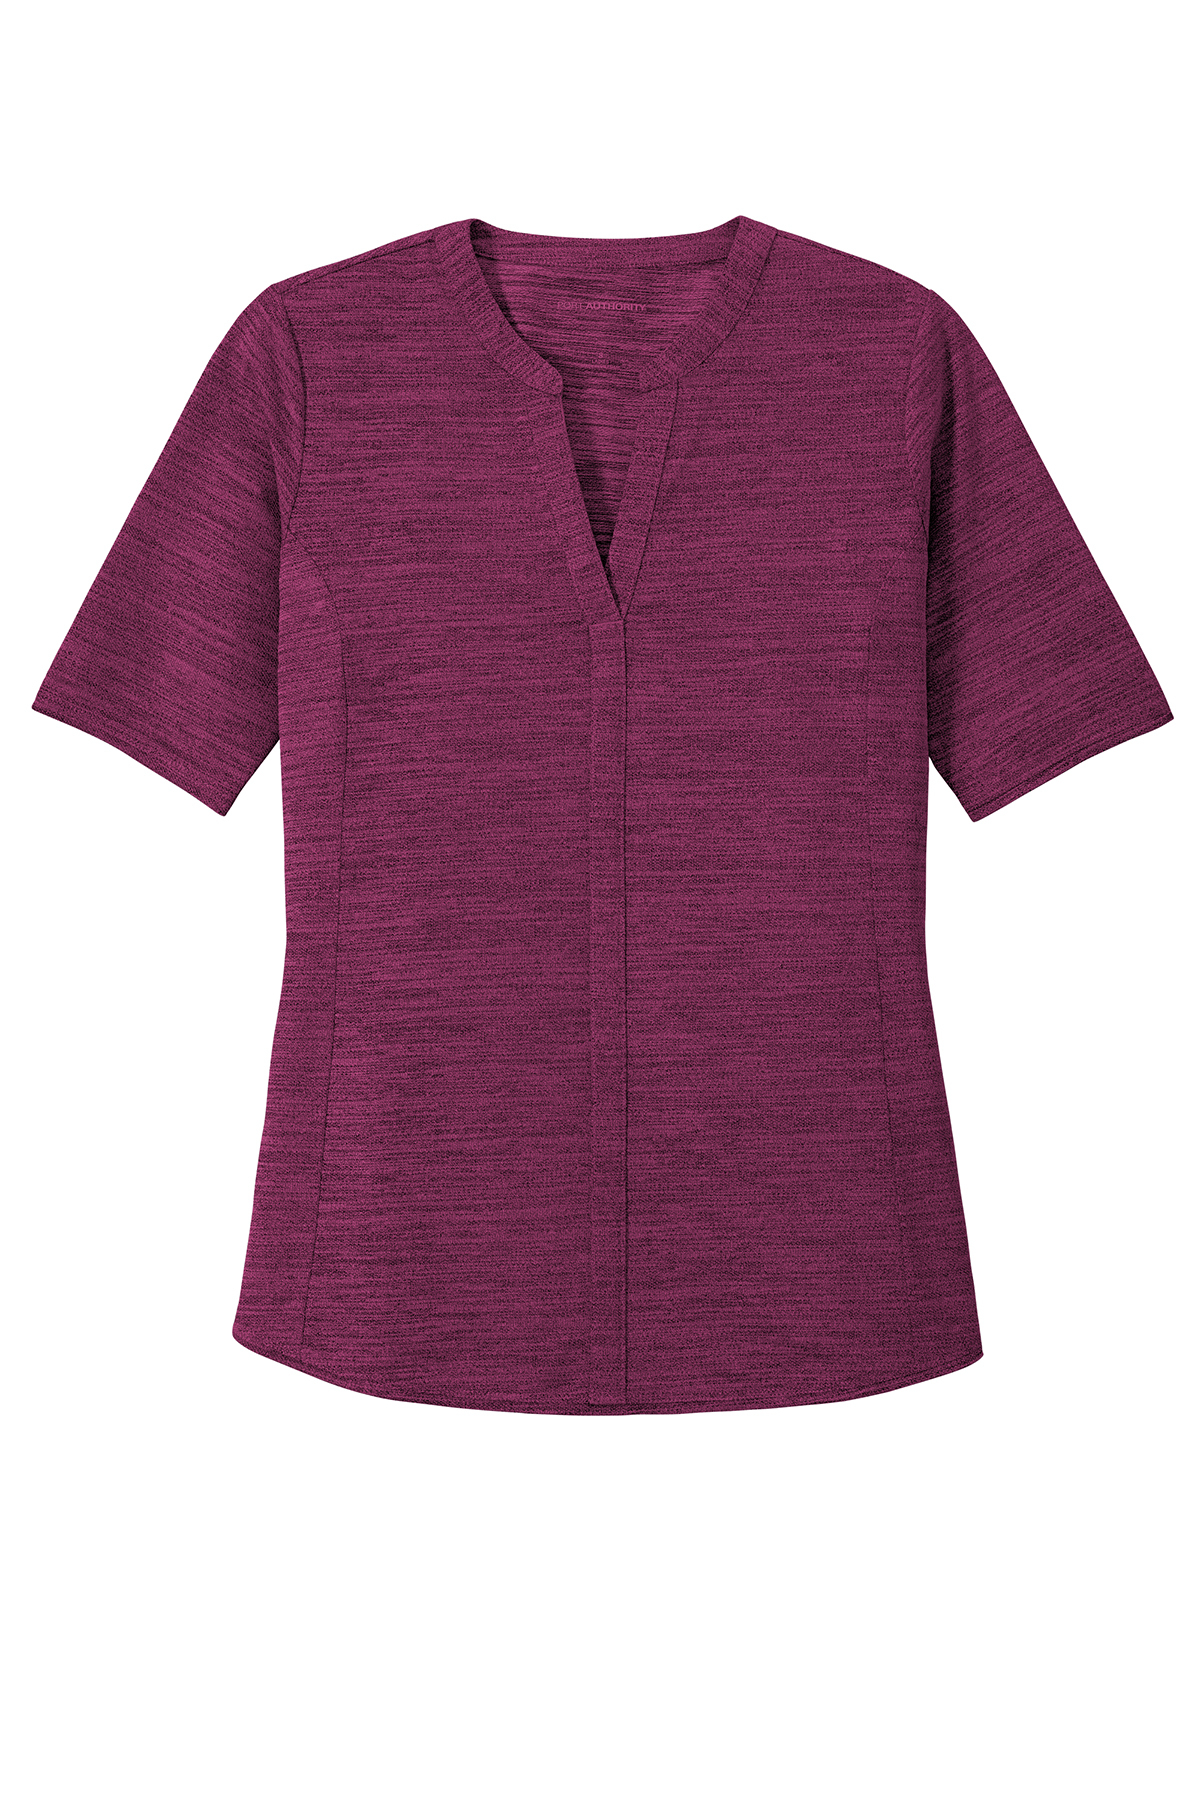 Port Authority ® Ladies Stretch Heather Open Neck Top Carver Yachts